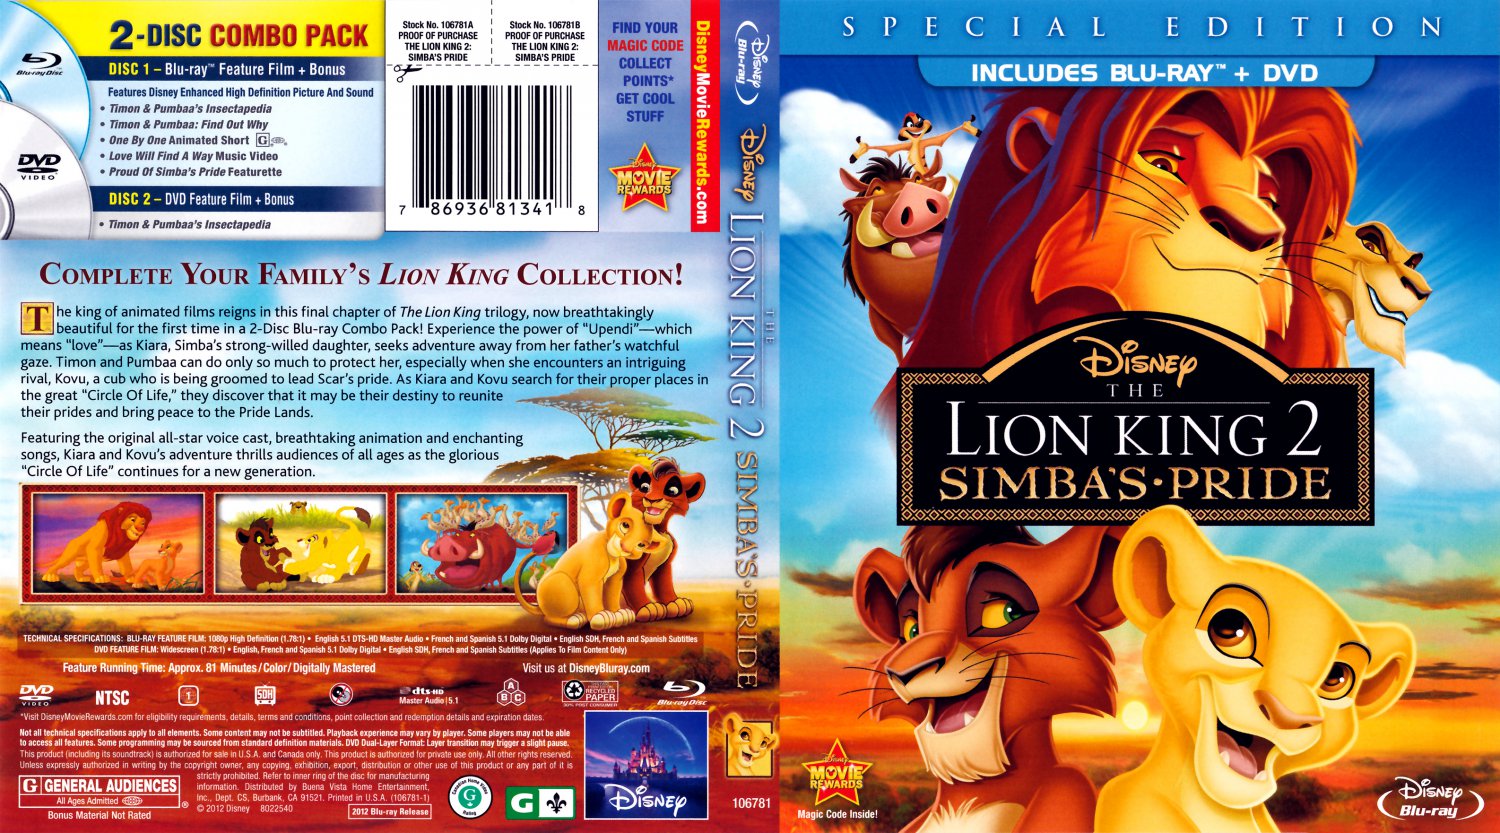 The Lion King 2 Simba's Pride DVD Cover